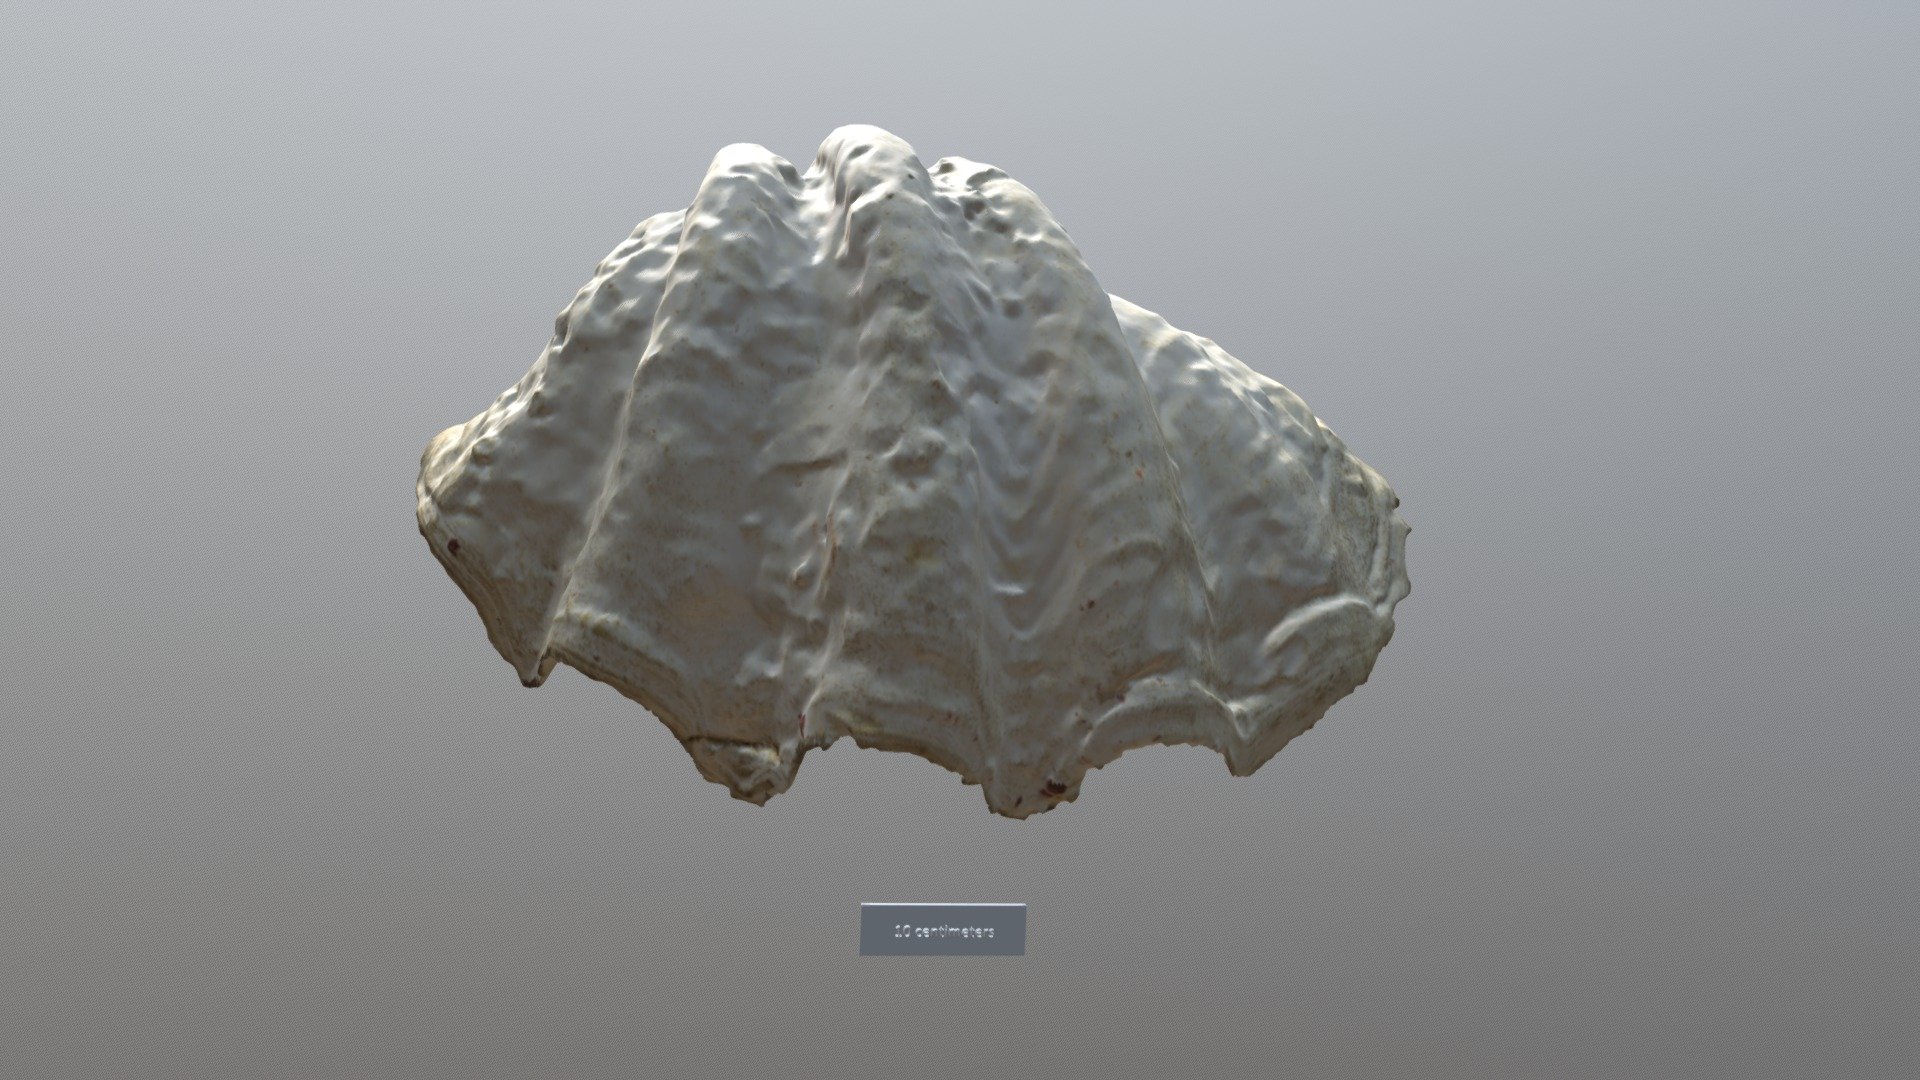 Giant Clam Shell Vcu3d3605 3d Model By Virtual Curation Lab Virtualcurationlab 61f7740